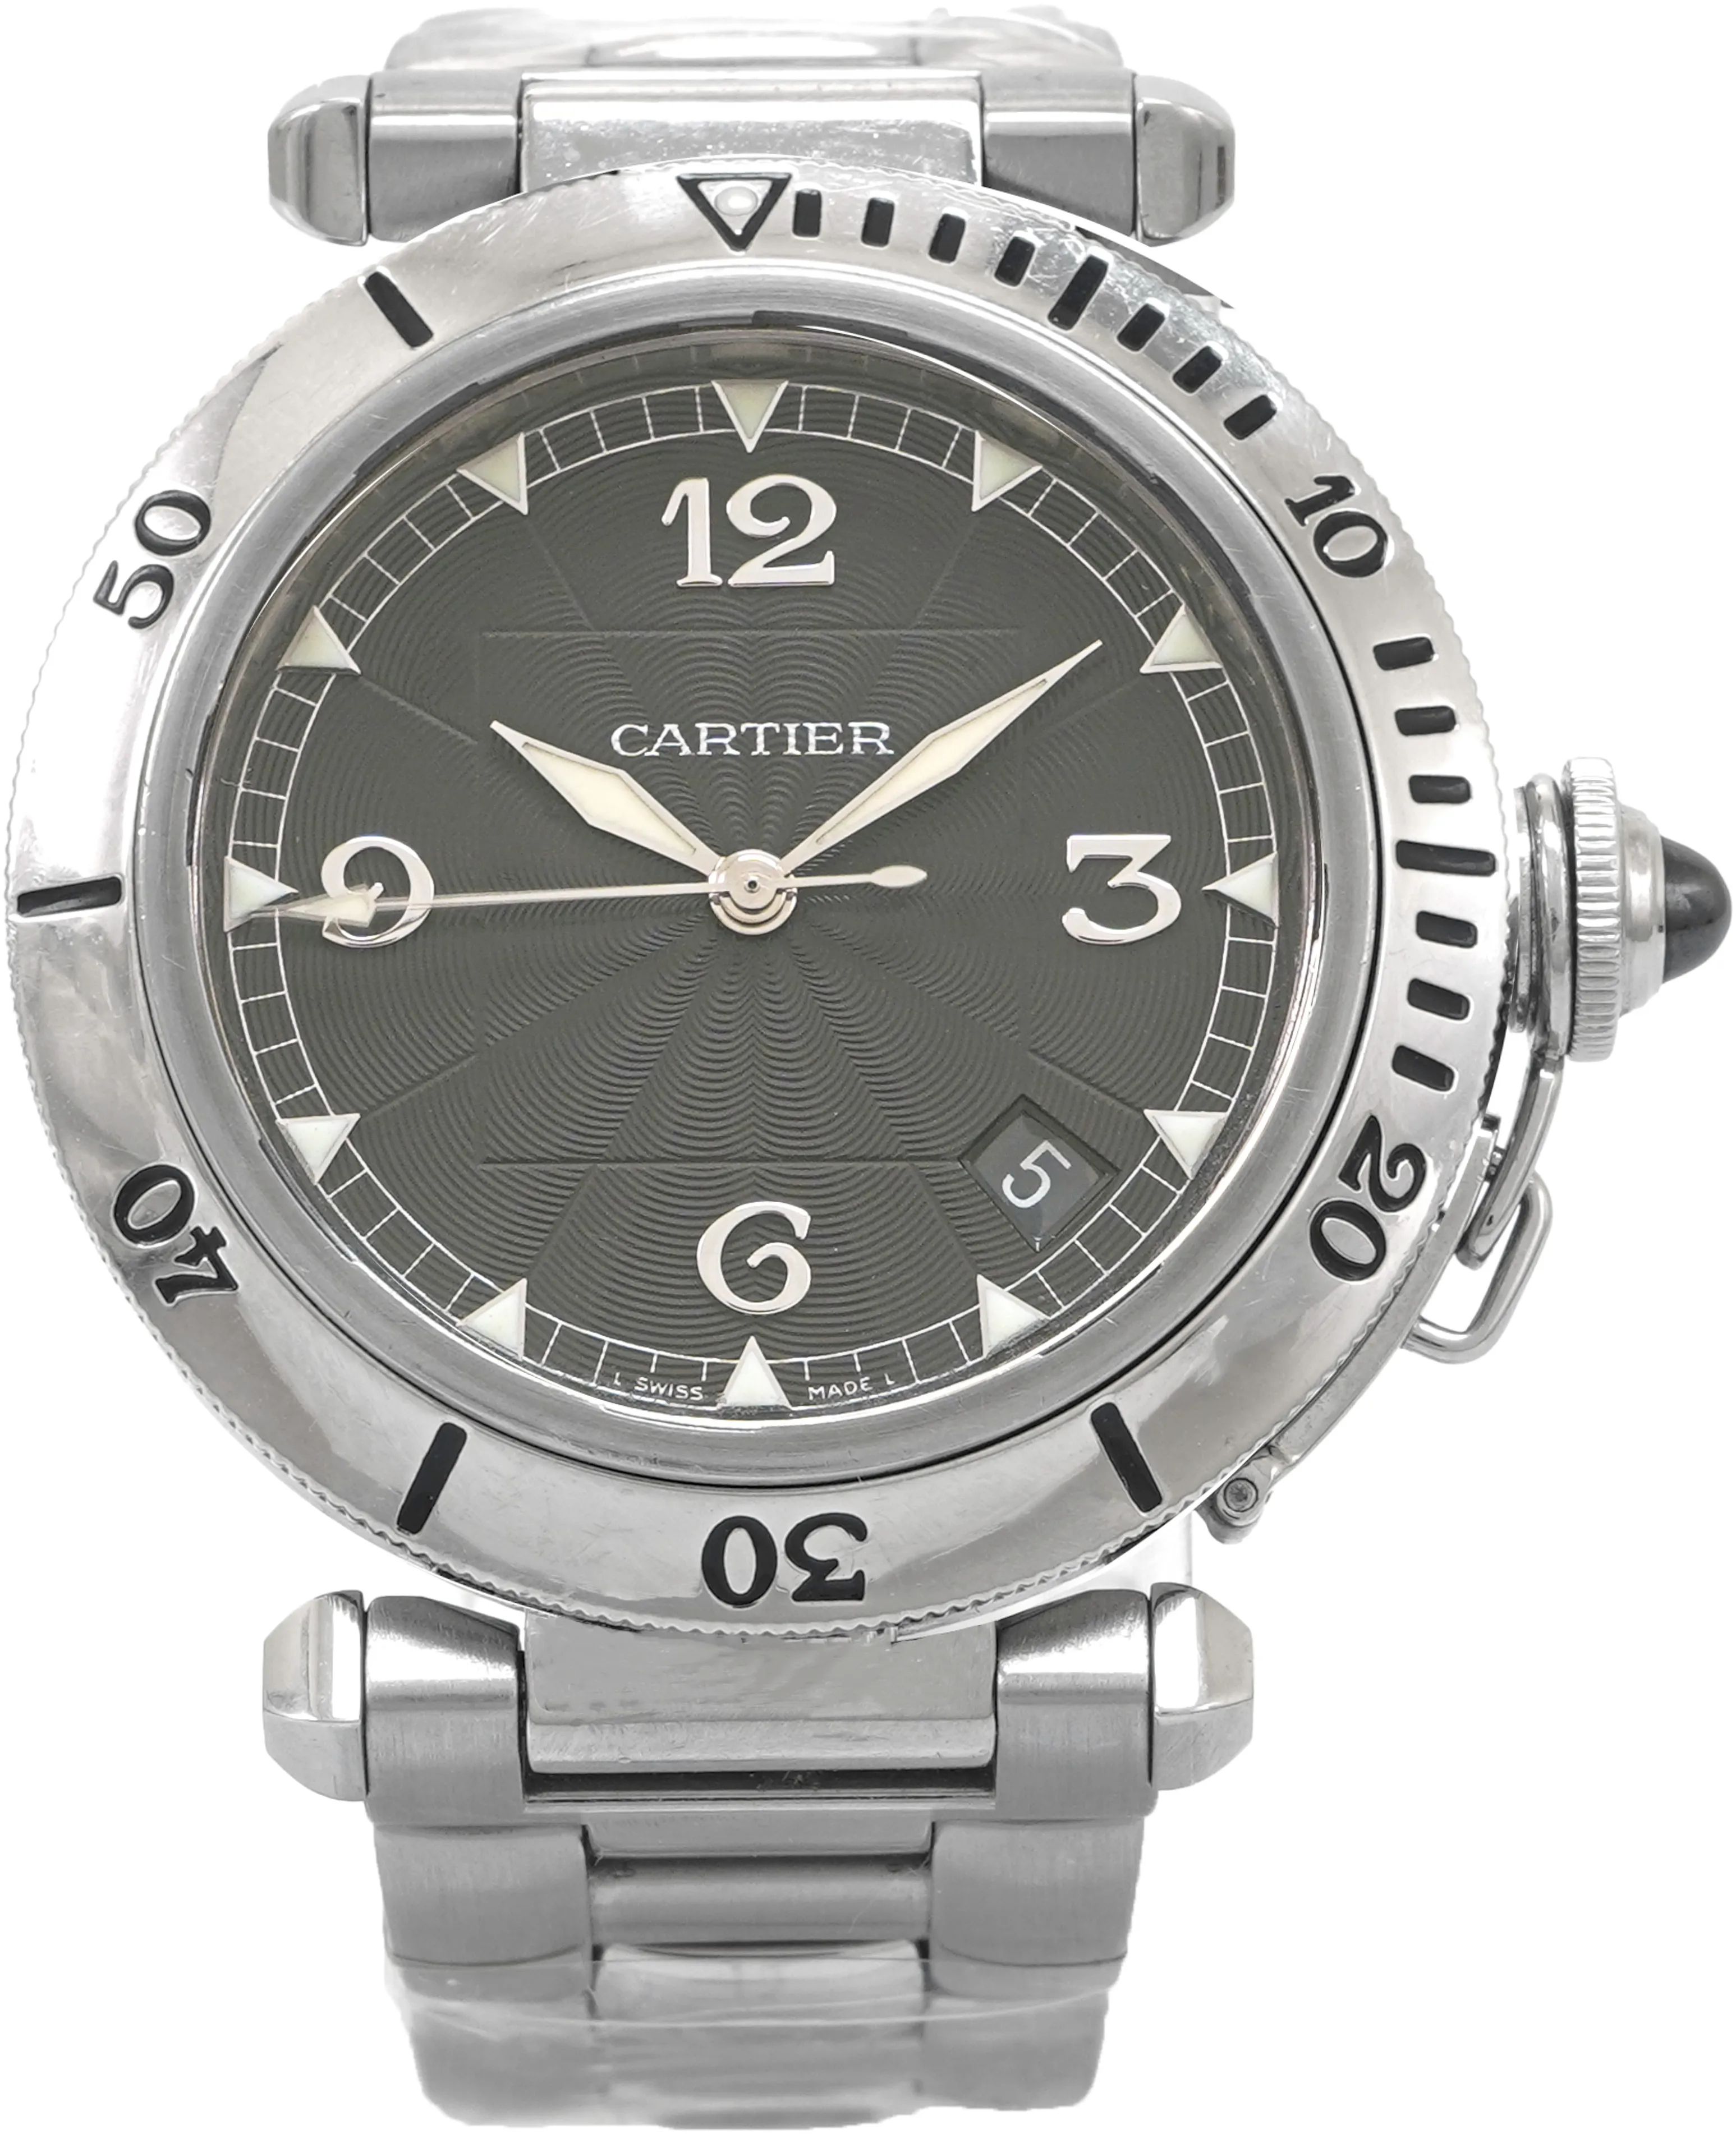 Cartier Pasha 2379 38mm Stainless steel